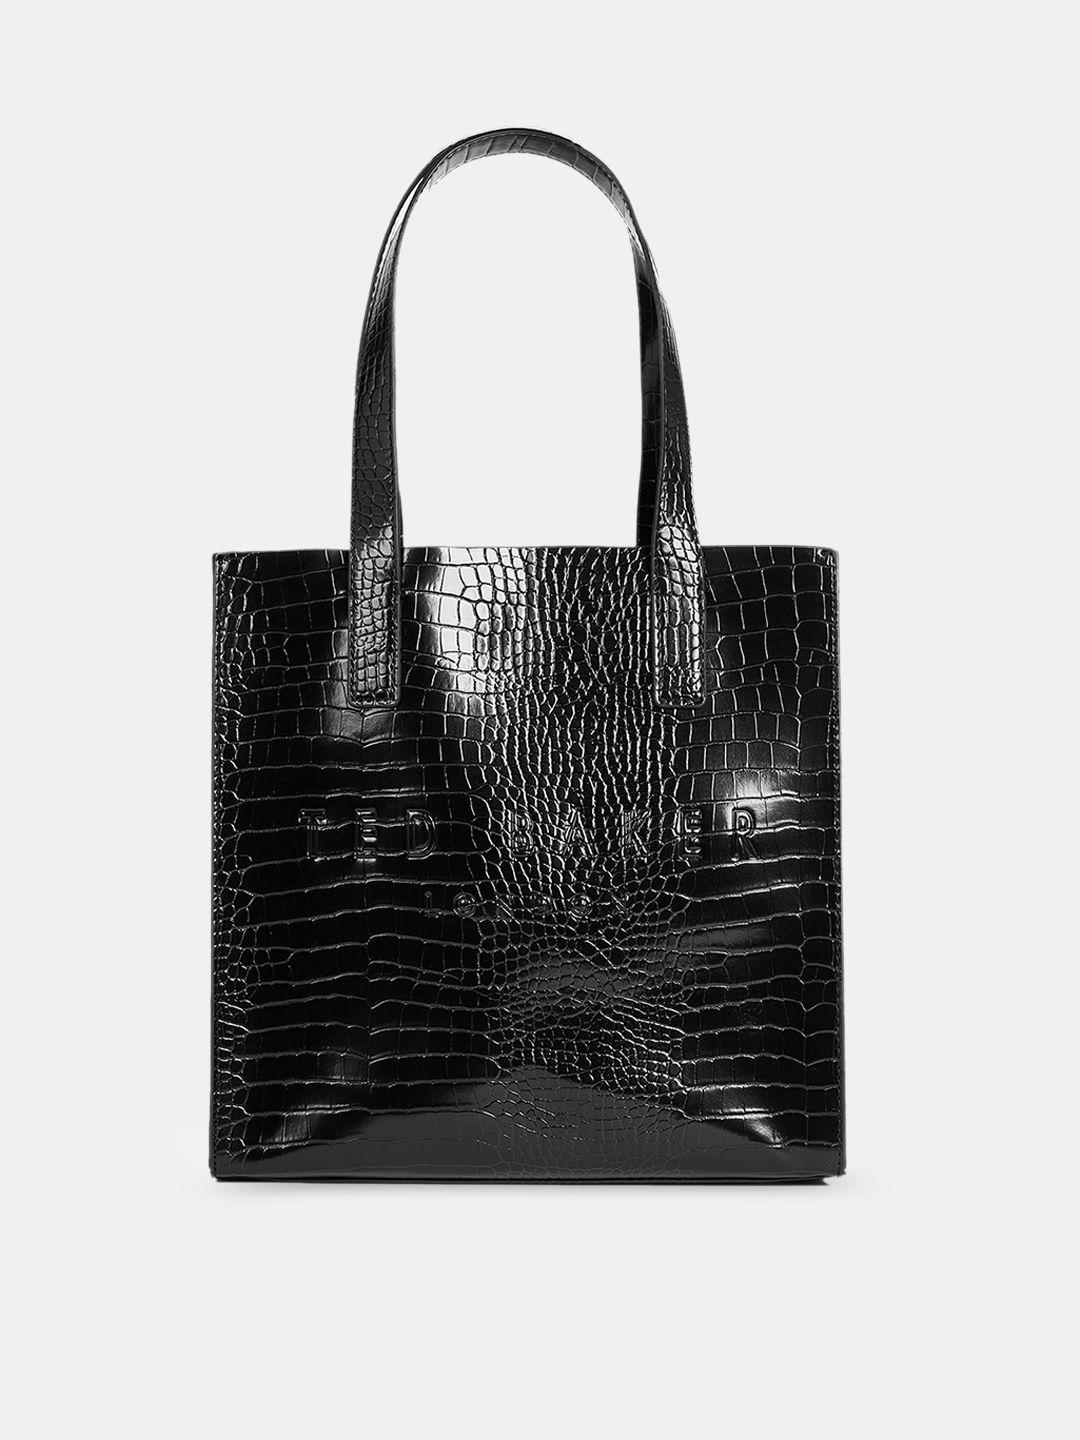 Ted Baker Textured PU Oversized Shopper Tote Bag